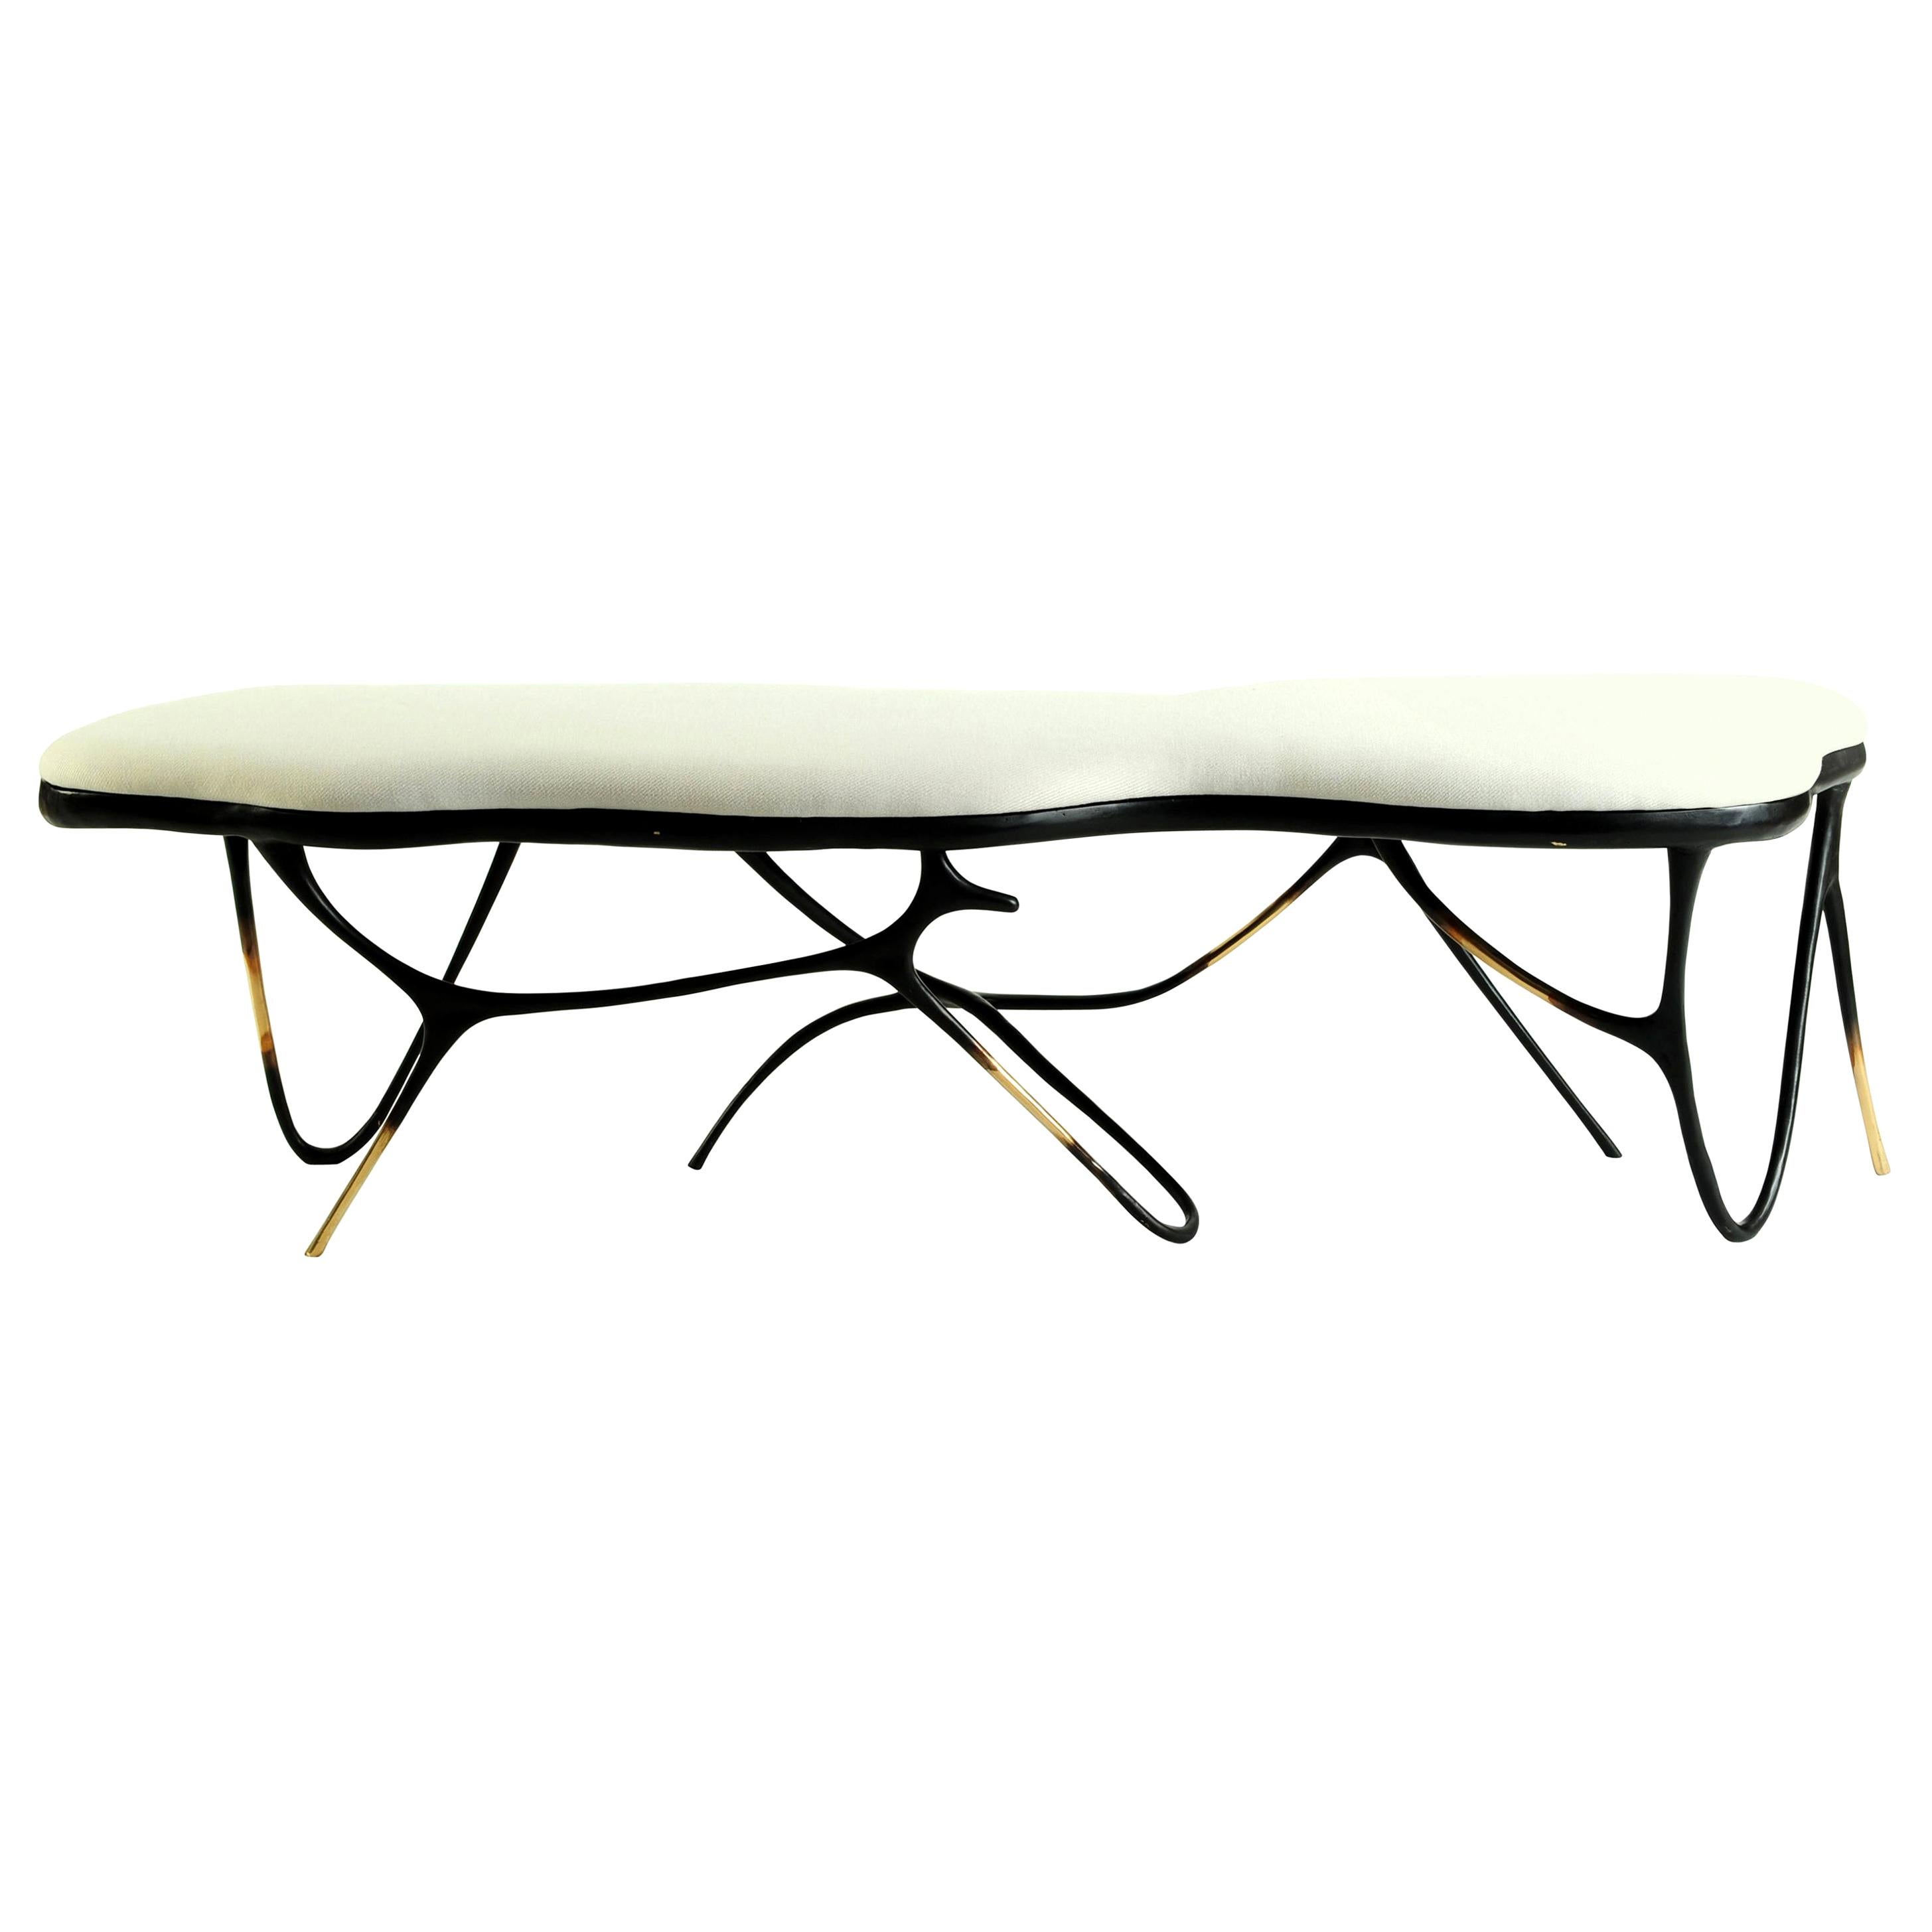 Calligraphic sculpted brass bench by Misaya
Dimensions: W 158 x L 38 x H 40 cm
Hand-sculpted brass table.

Misaya emulates Chinese ink paintings through the process of lost-wax casting.

Each piece in the Ink collection, which consists of a dining